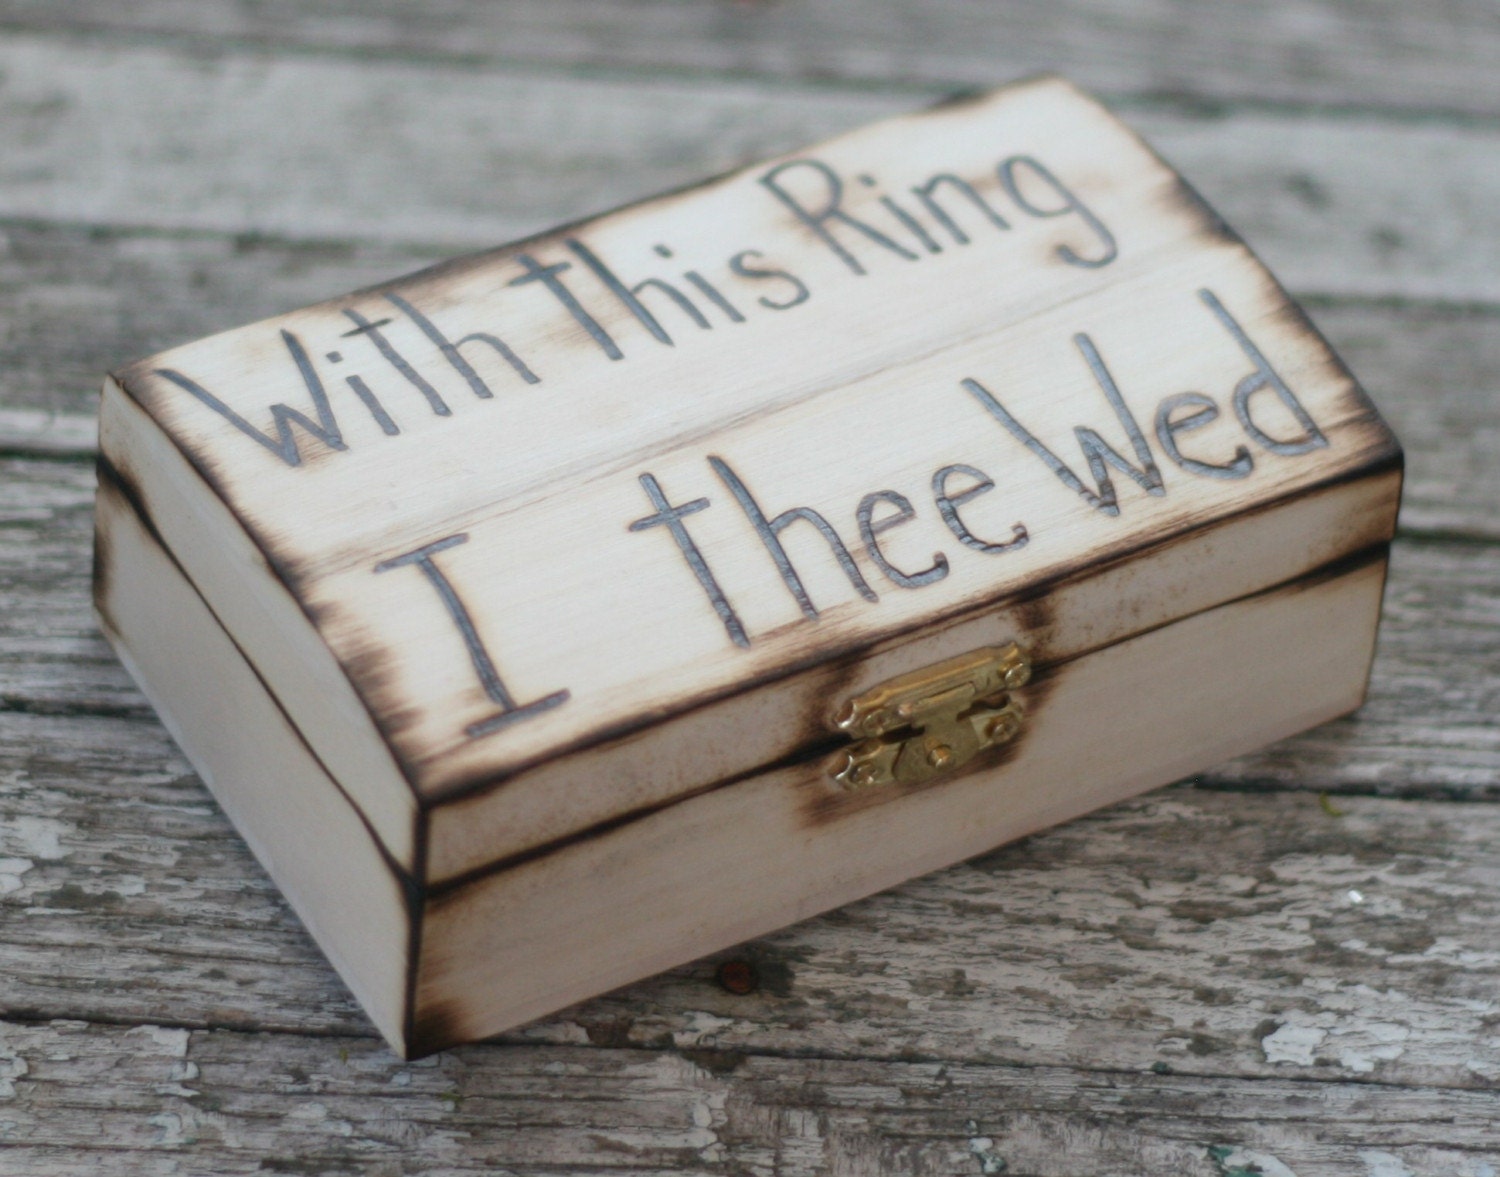 With This Ring I Thee Wed Rustic Woodland Western Beach Ring Bearer Pillow Ring Jewelry Box Personalized